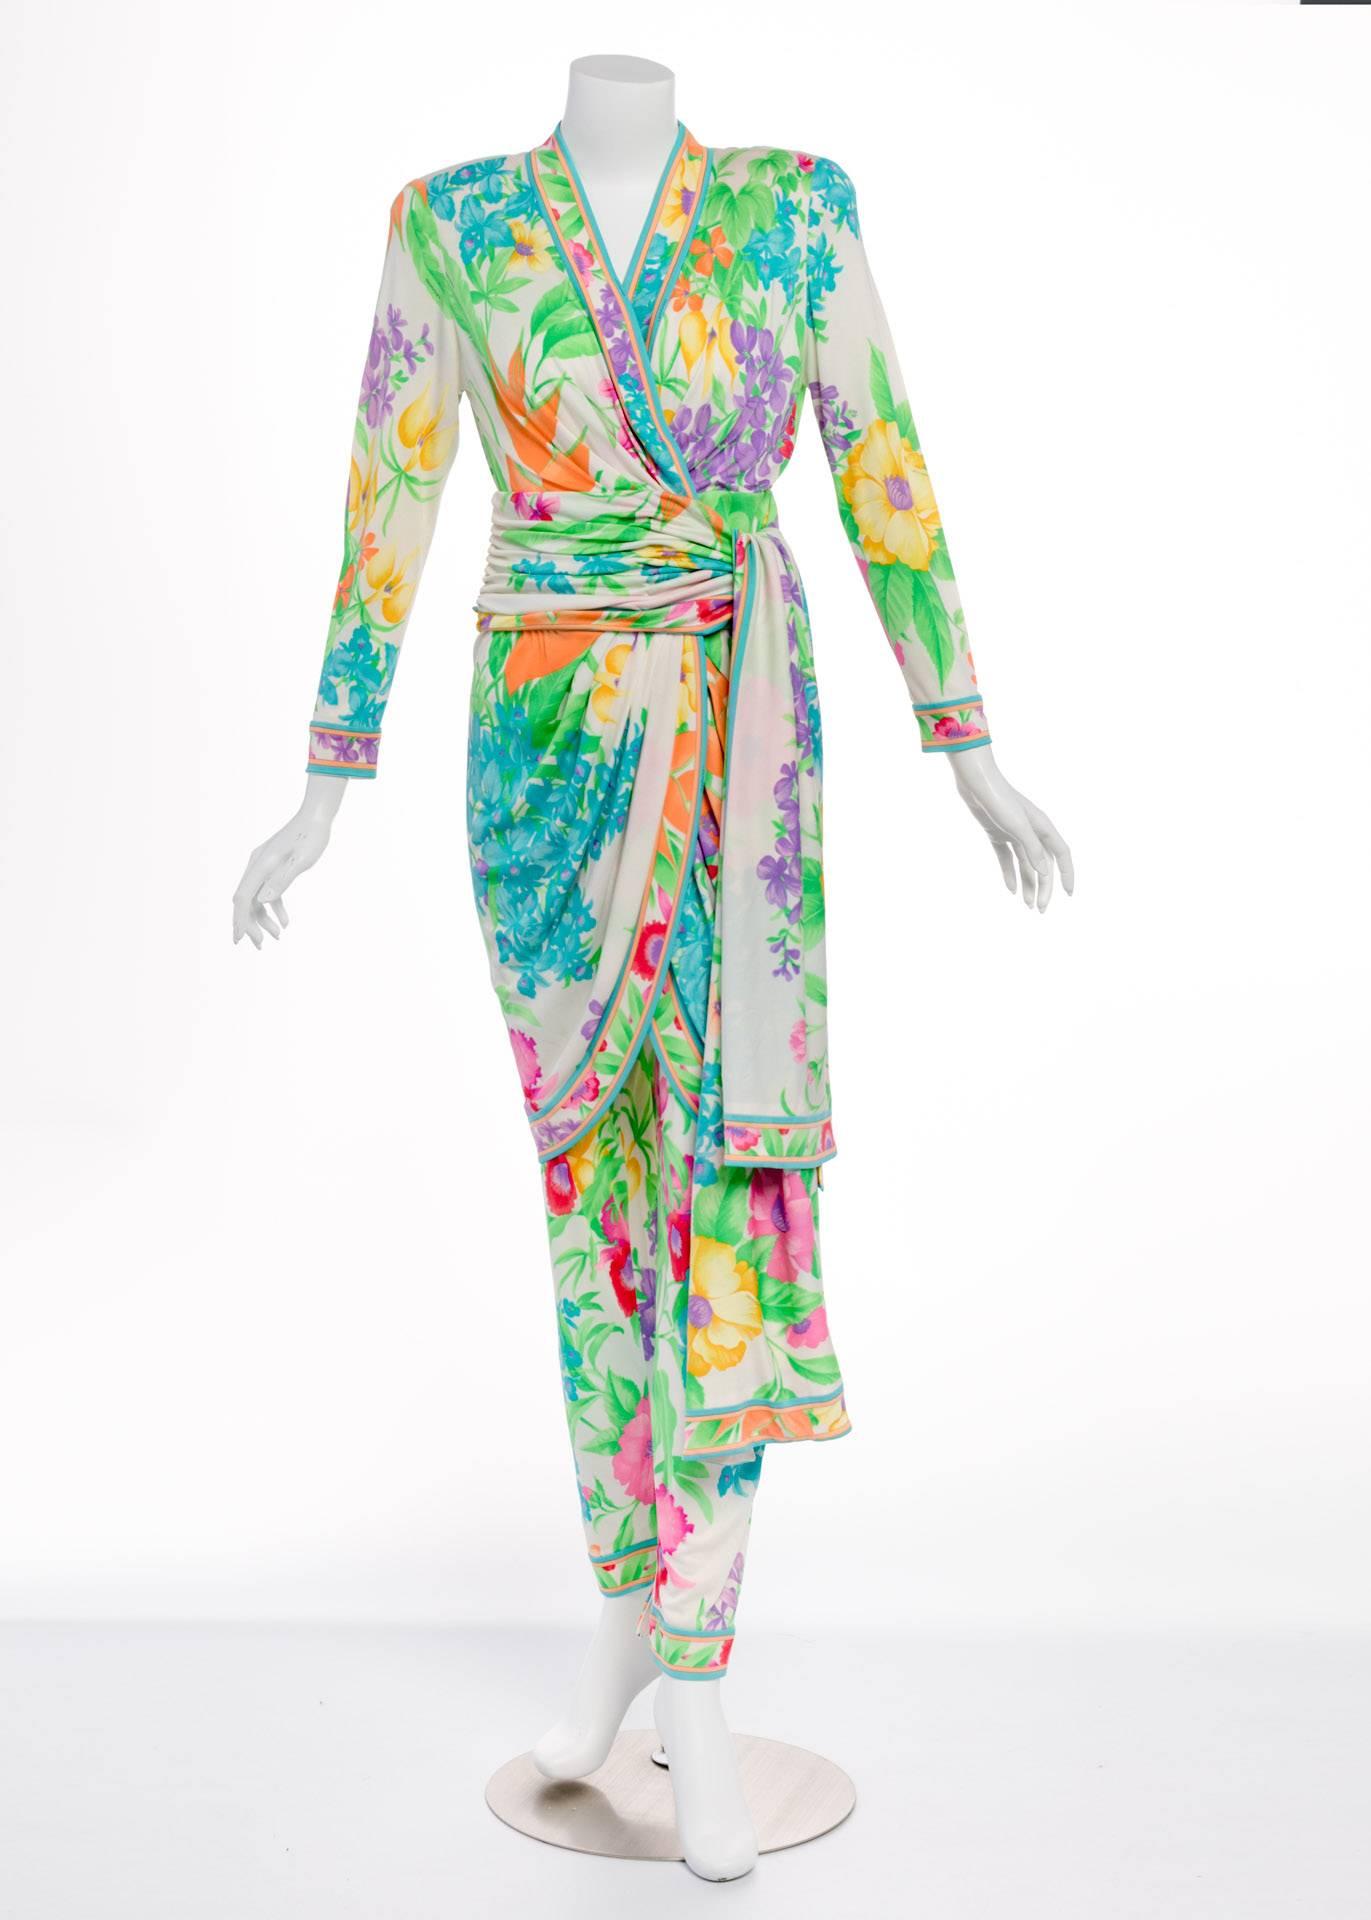 Leonard Paris is collected for its luscious prints, like the one found on this fabulous dress and pants combo from the Nineties. A gorgeous display of watercolored flowers in a Monet-inspired palette bursts forth beautifully on the mikado